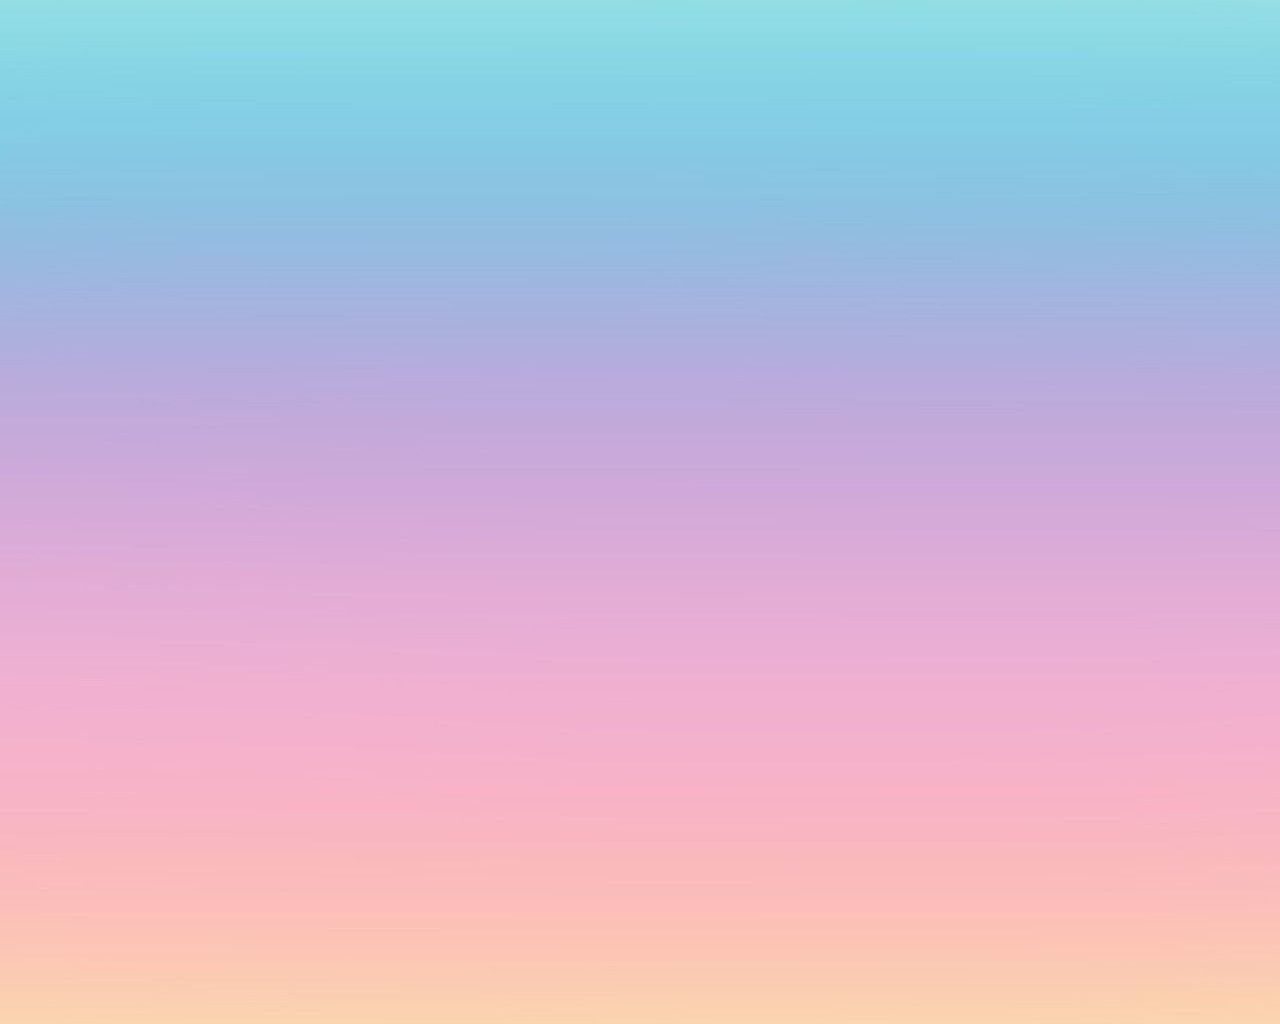 A gradient image of a sky at sunset - Colorful